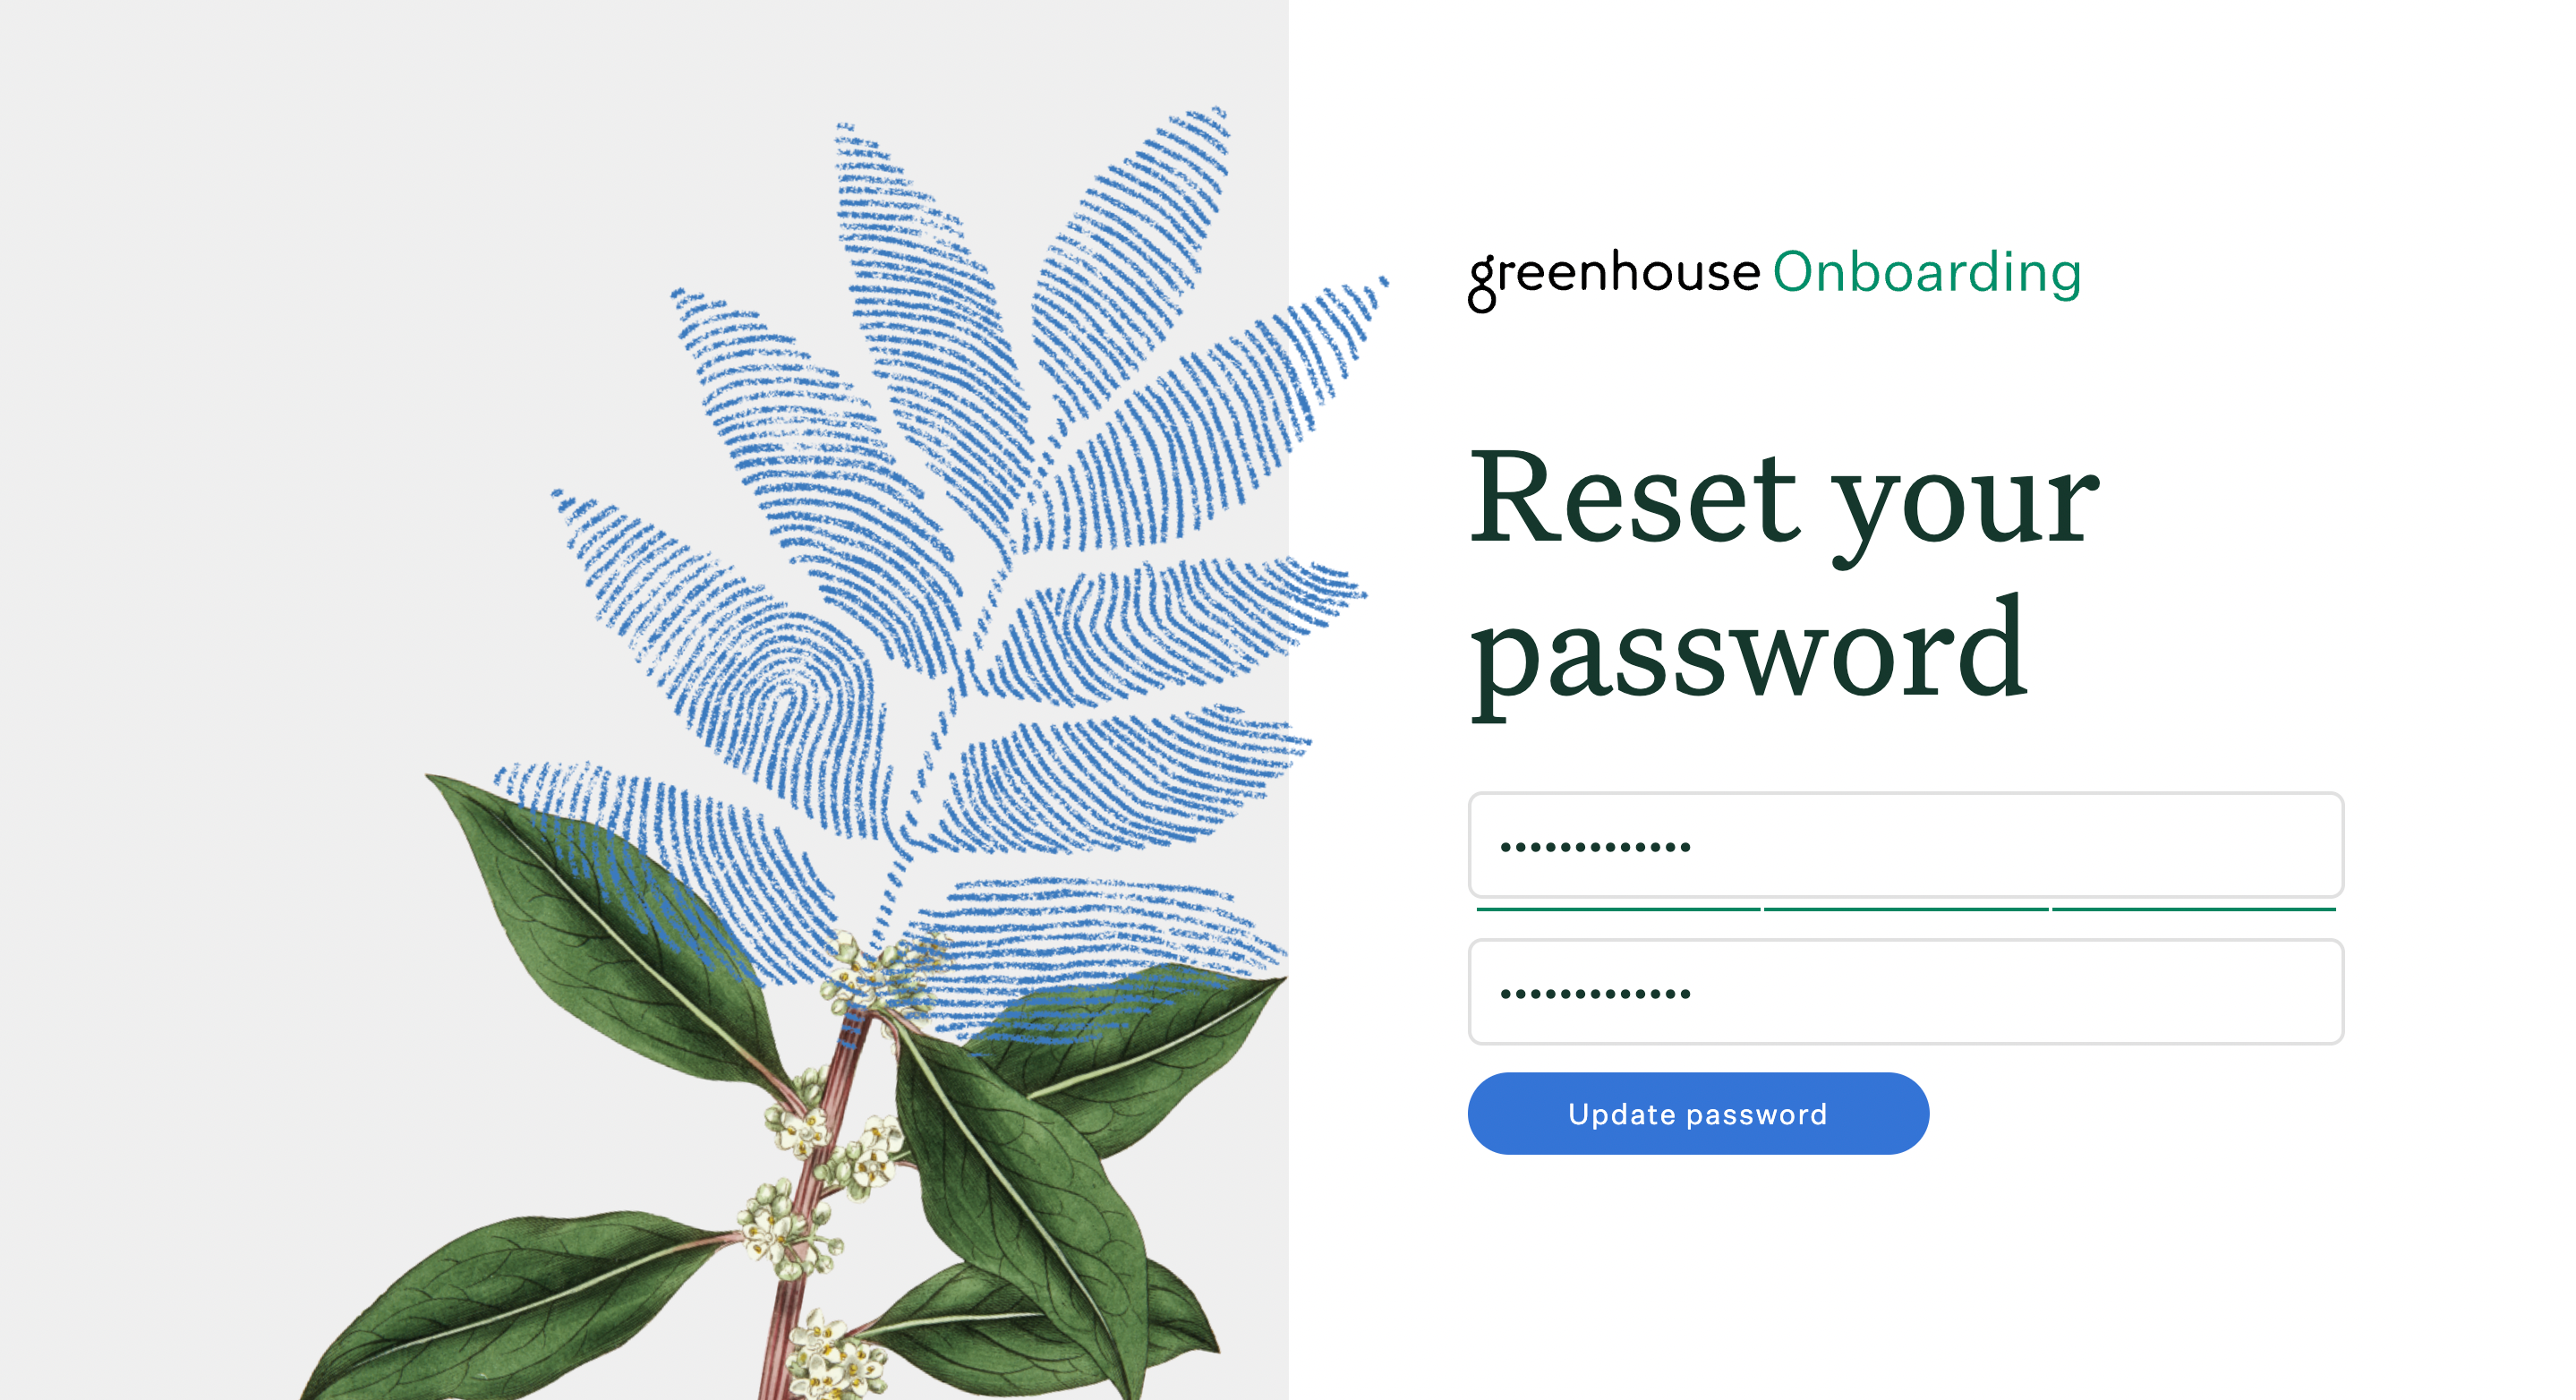 Greenhouse Onboarding password reset page with strong new password filled out twice and green line indicating high strength